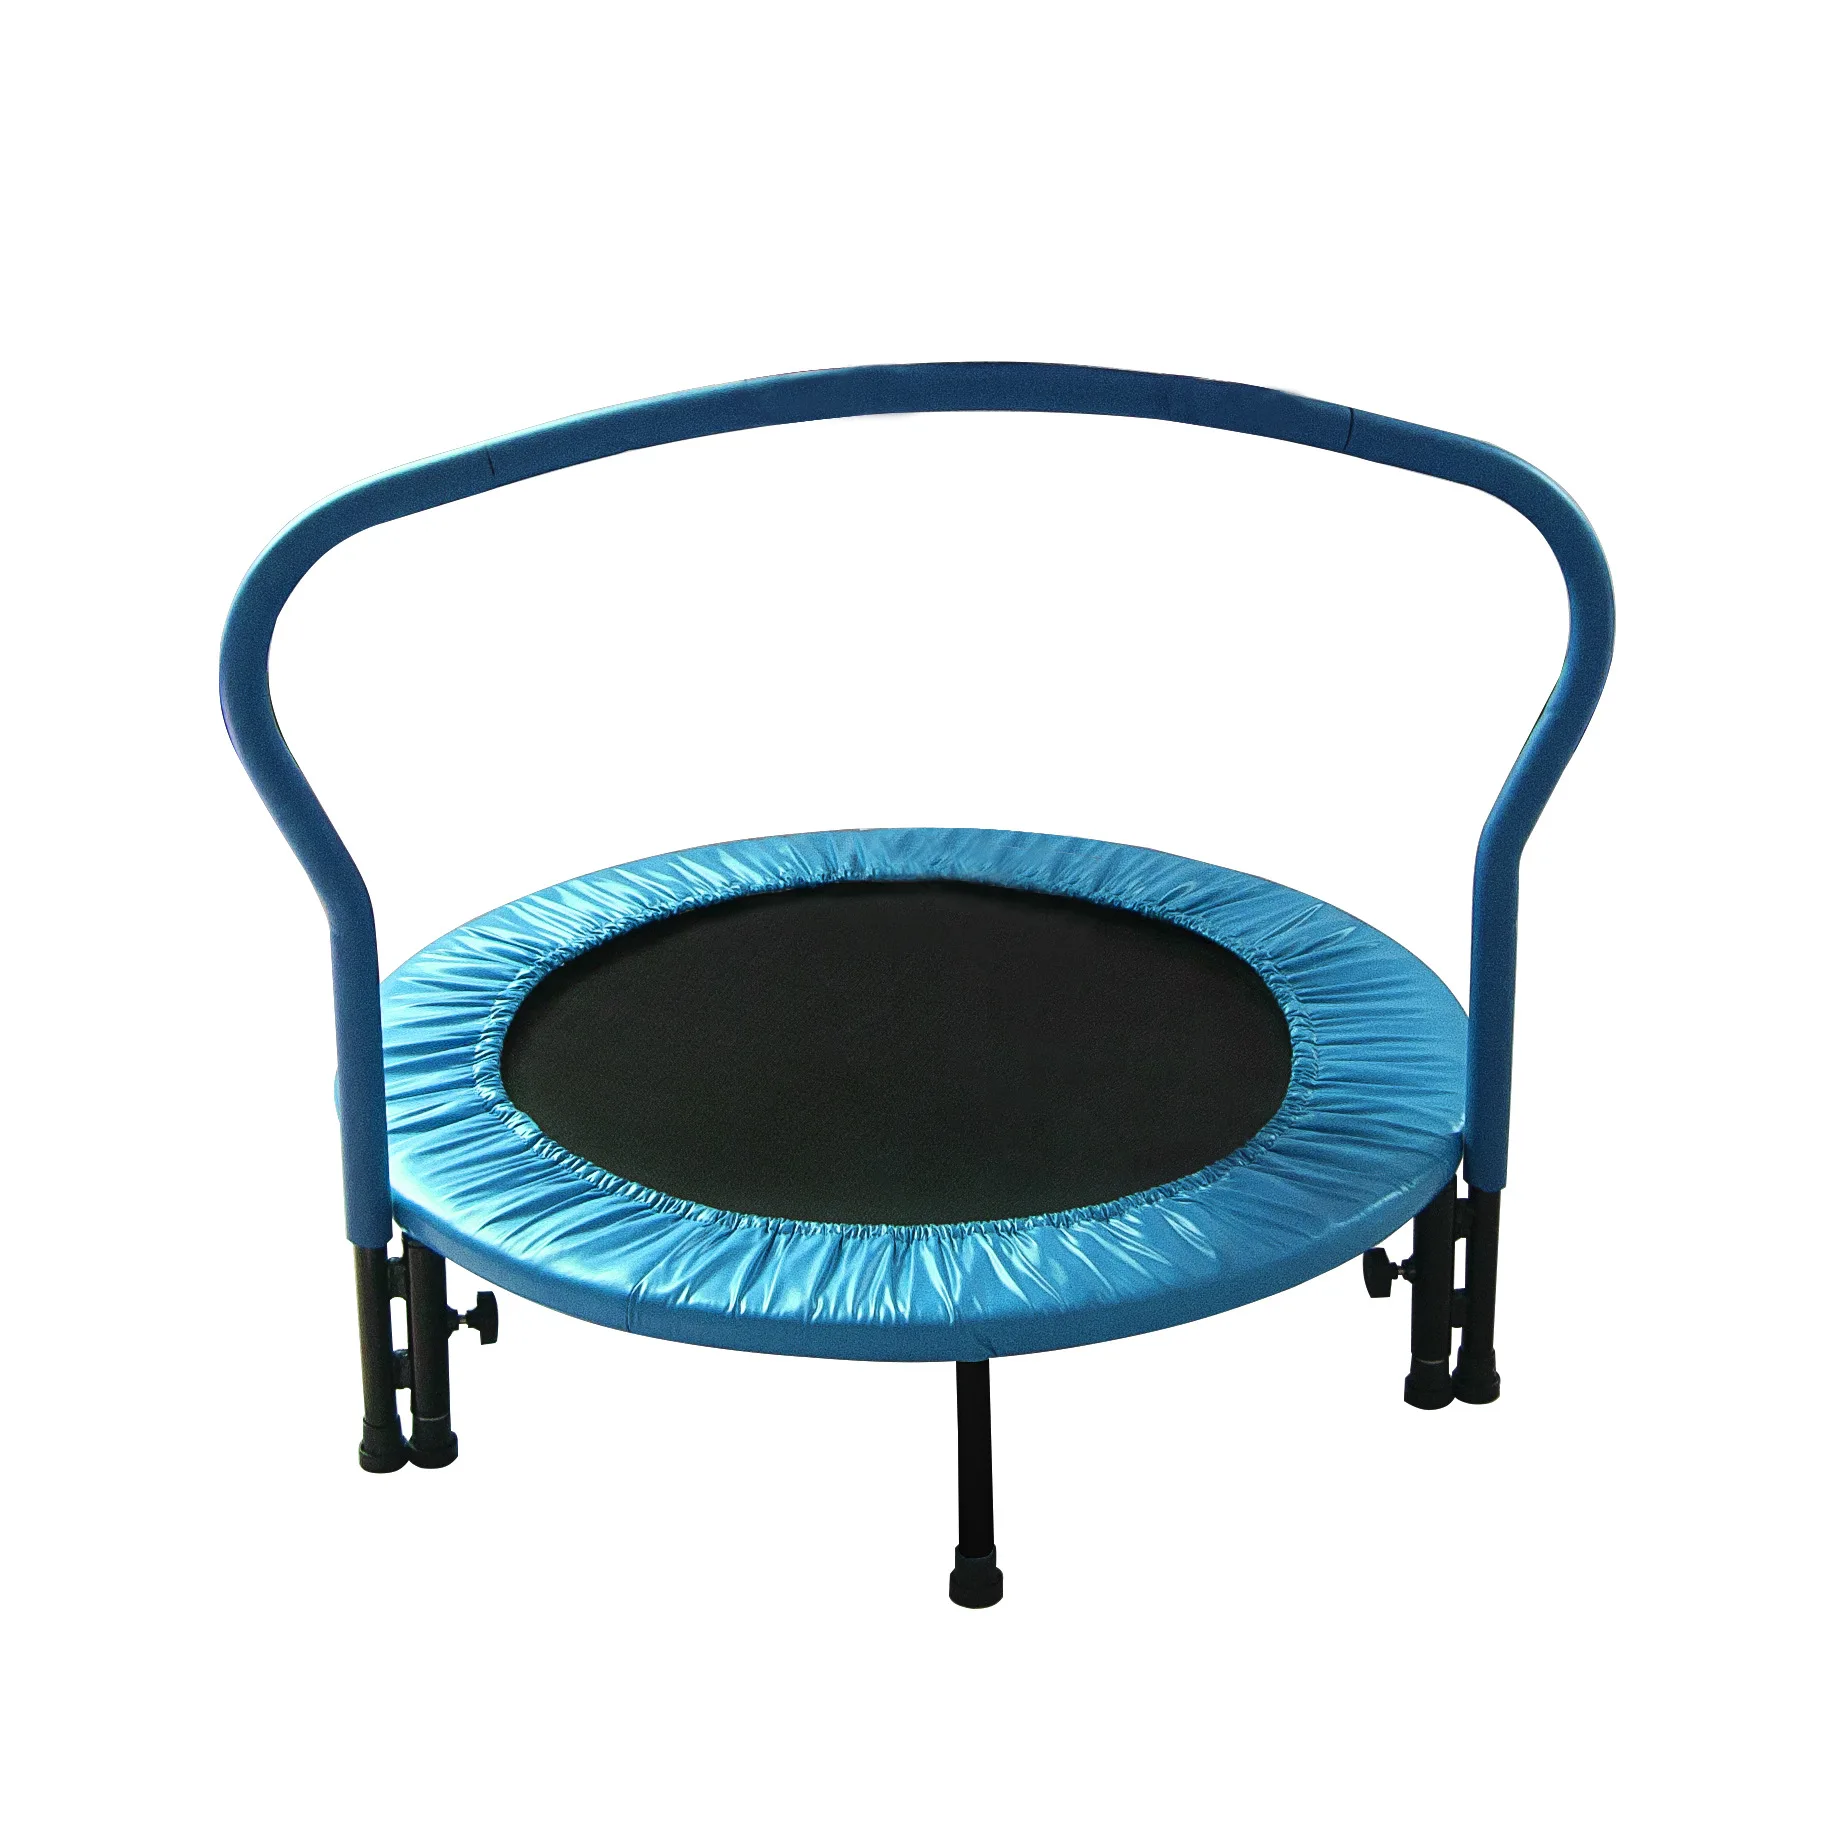 Trampoline Jump Thicken Waterproof Cover Round Spring Trampoline Pad Shock Absorbent PVC Material Replacement Parts